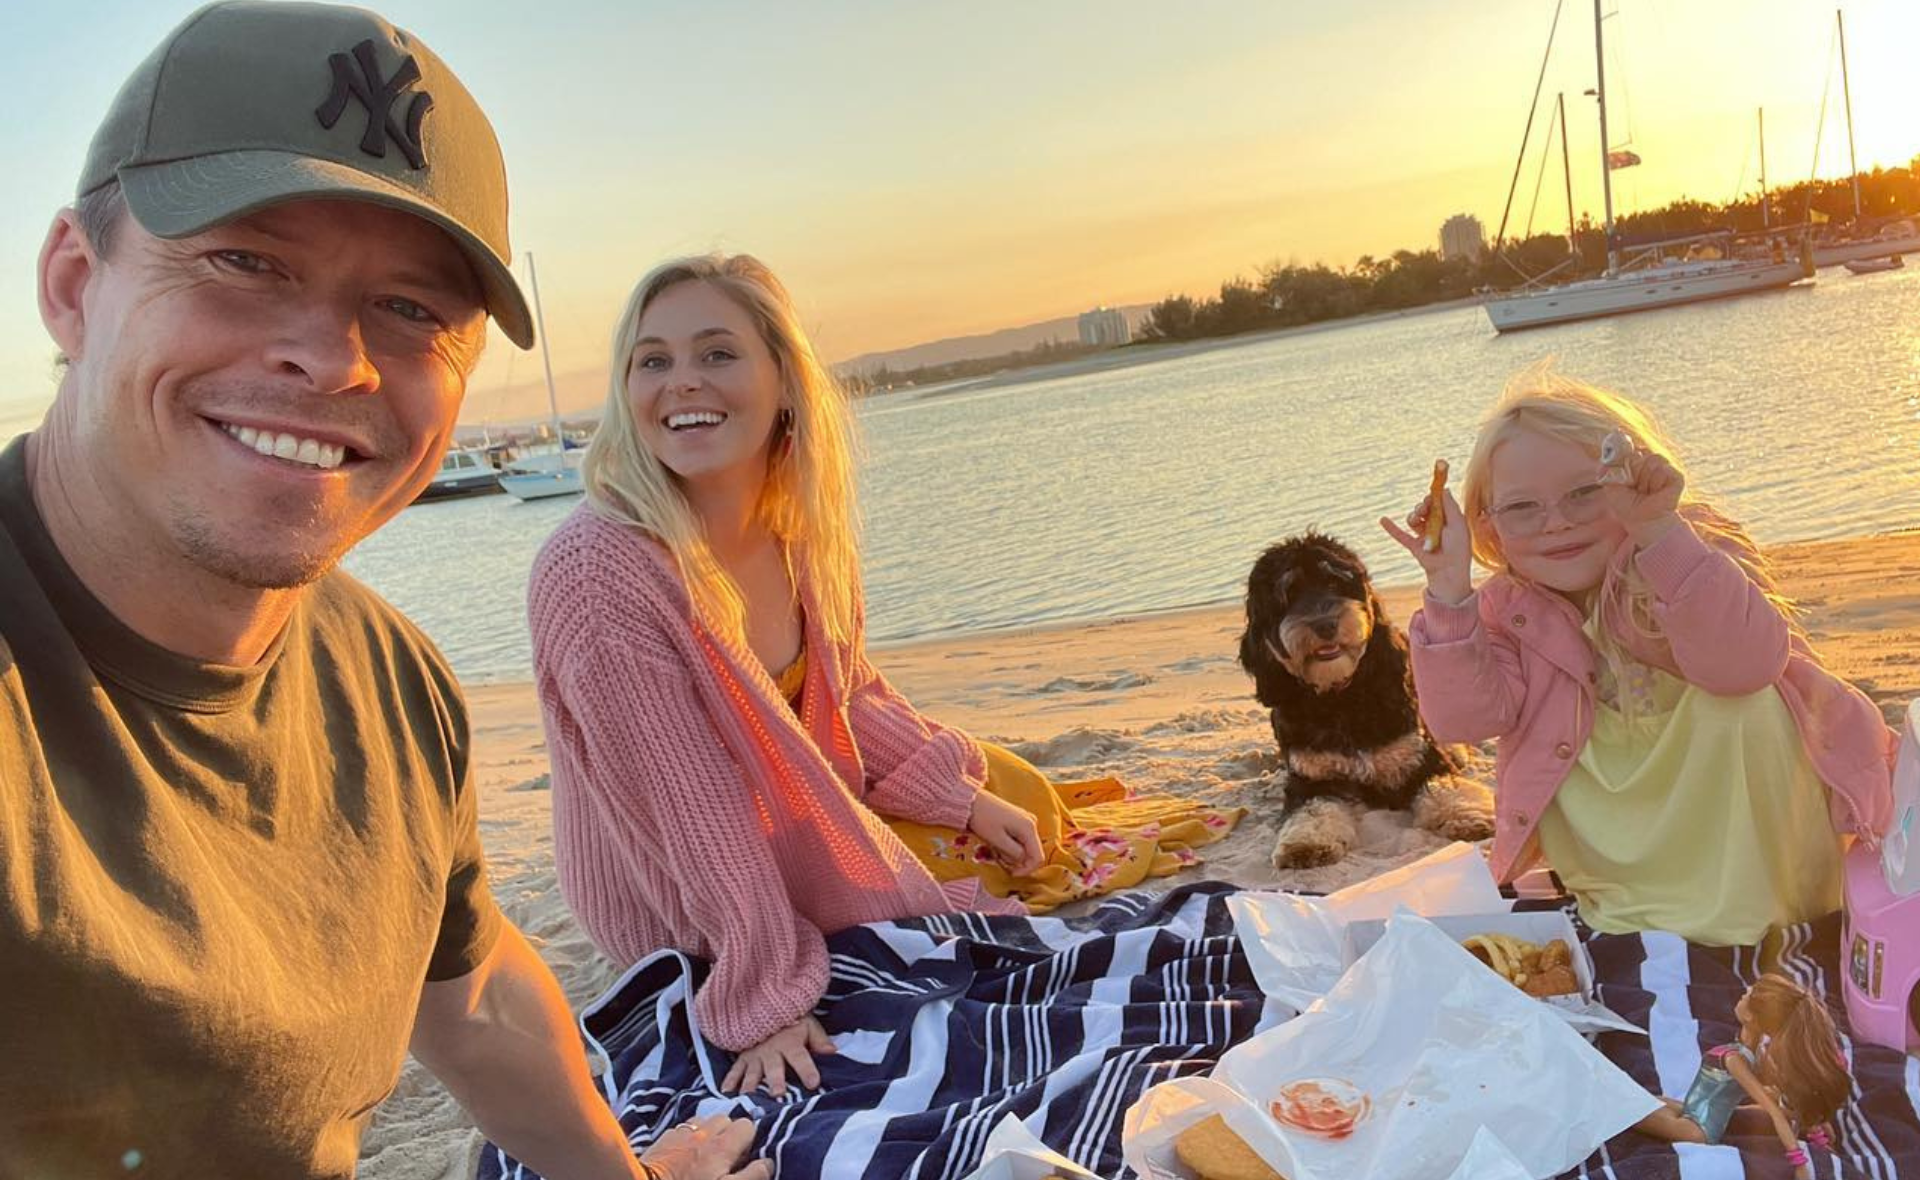 Todd Lasance couldn’t be more in love with his gorgeous family of four